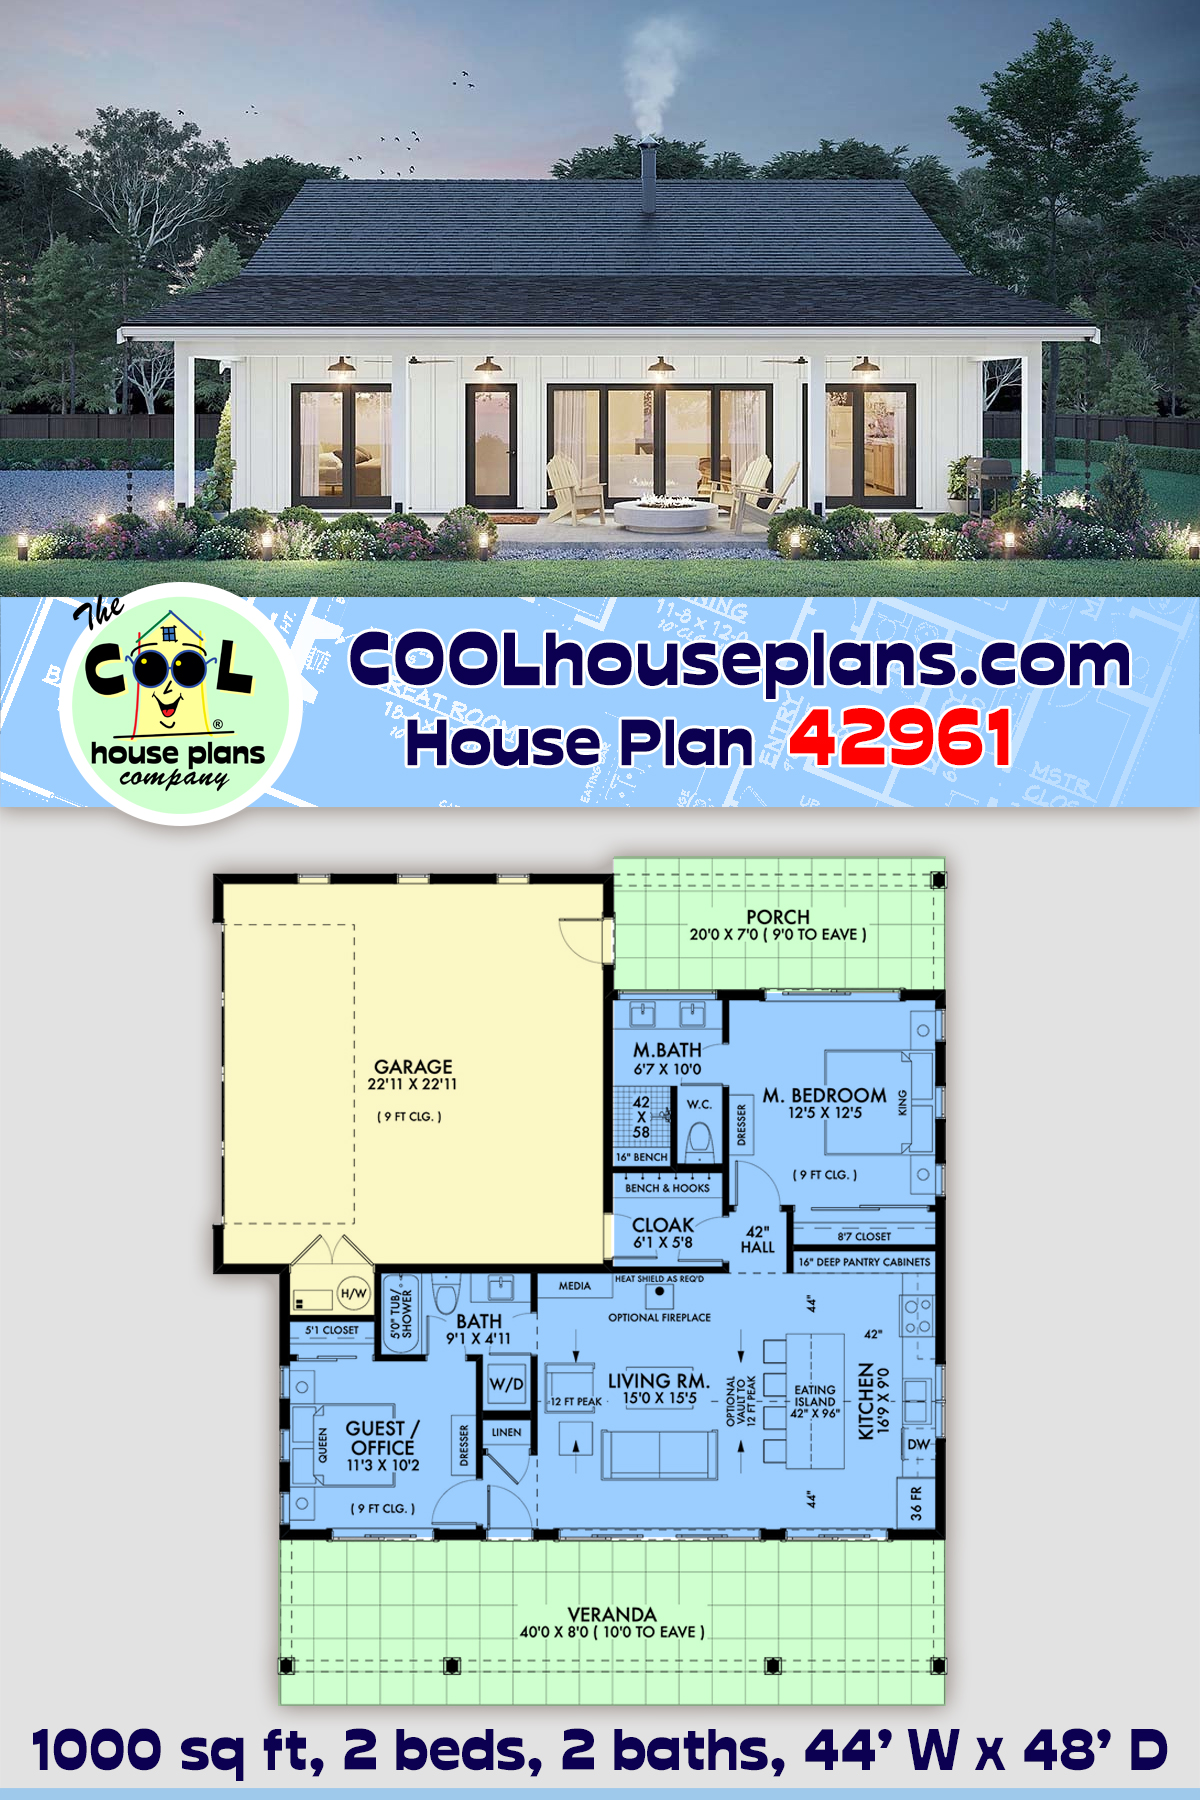 Cottage, Country, Farmhouse, Southern House Plan 42961 with 2 Beds, 2 Baths, 2 Car Garage